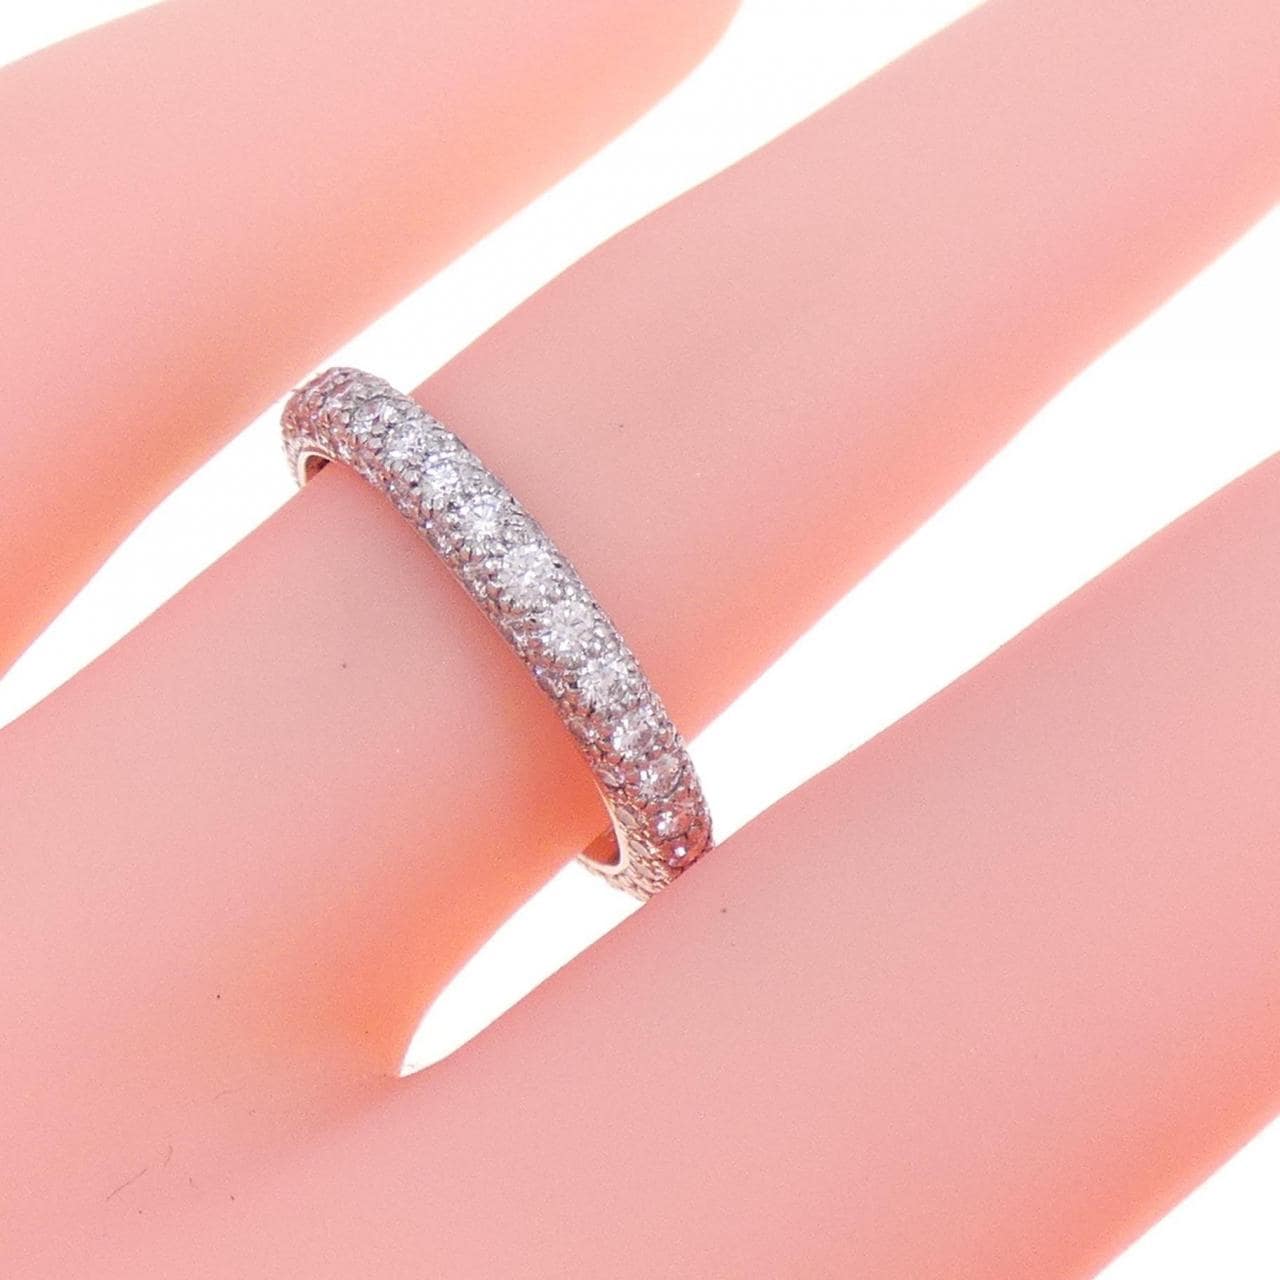 HARRY WINSTON dome pave ring